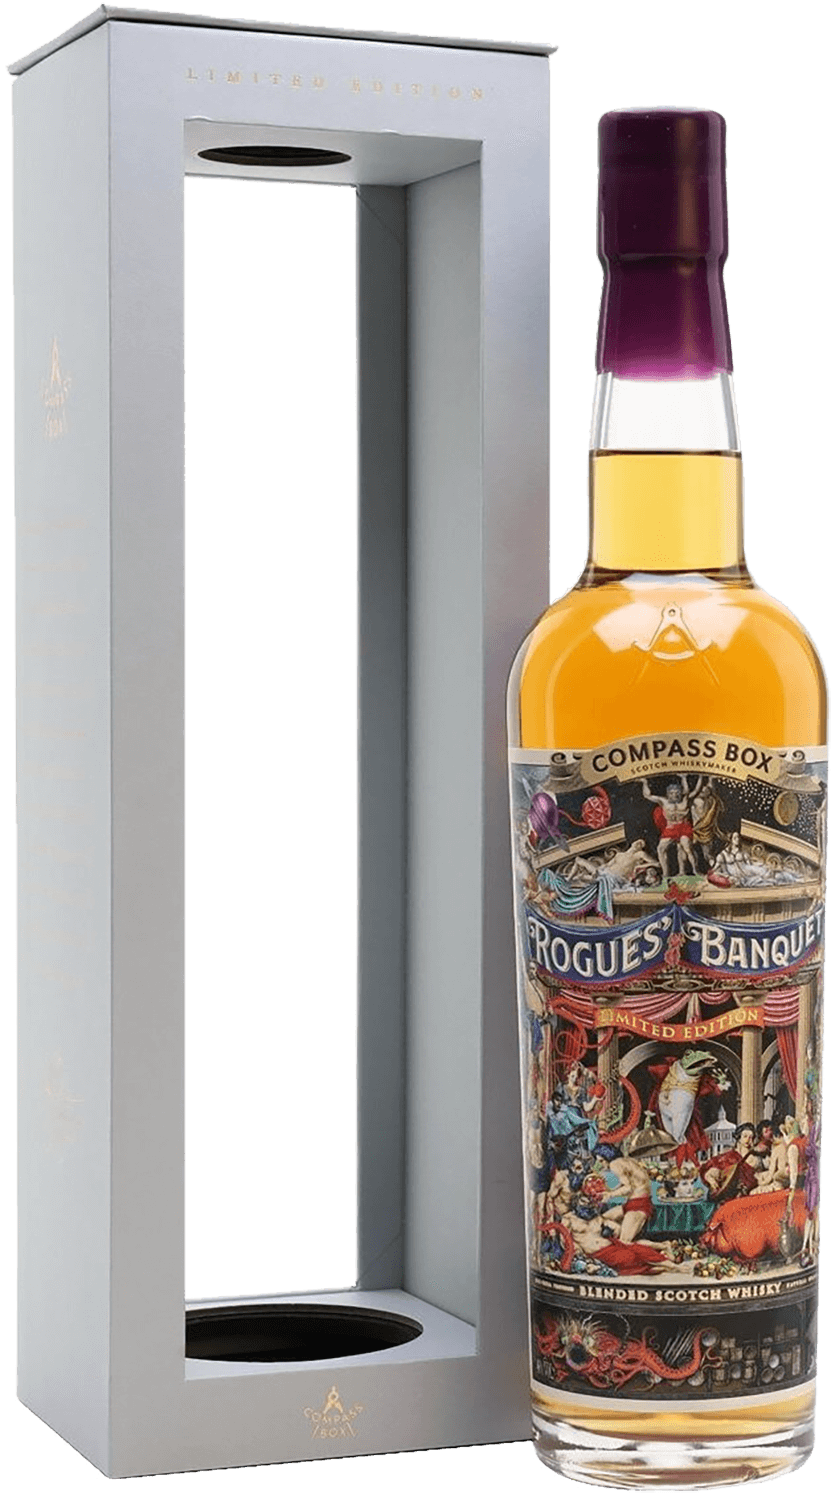 Compass Box Rogues' Banquet Blended Scotch Whisky (gift box) 33256